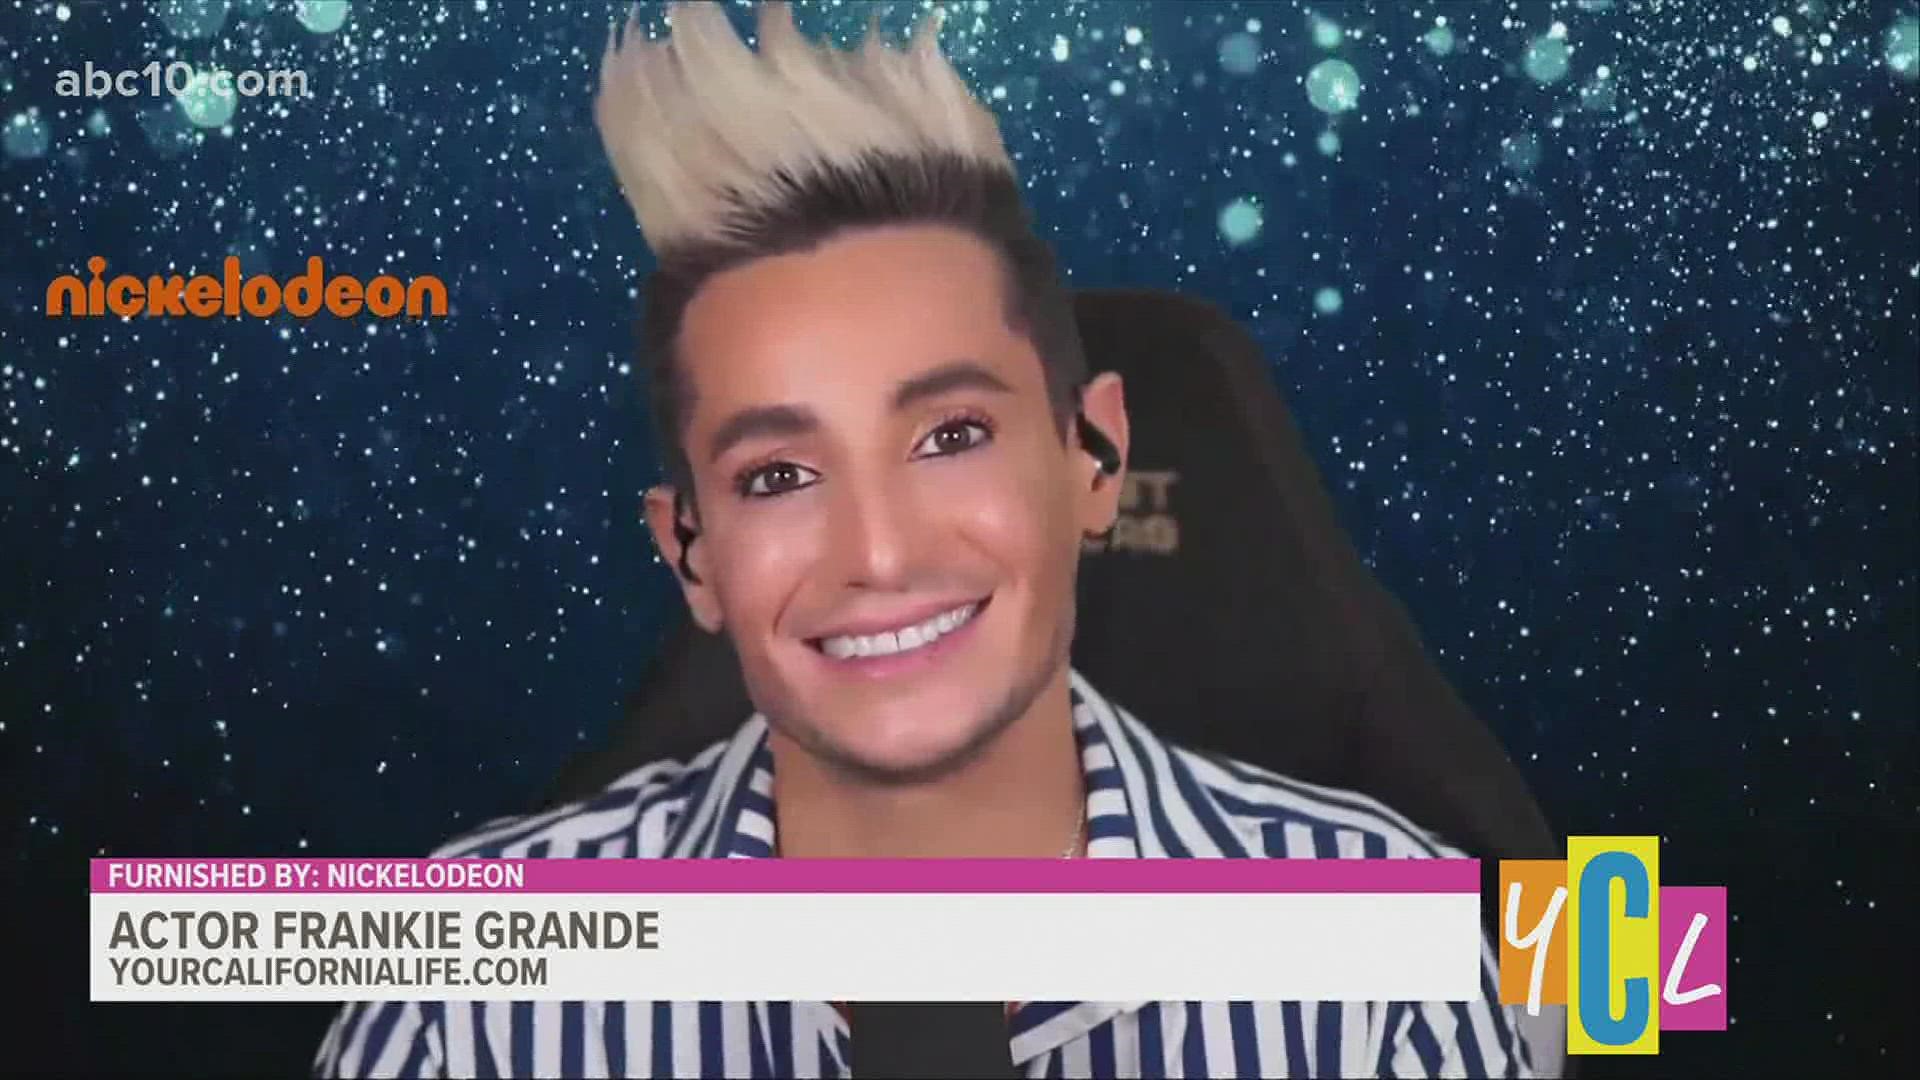 We talk to Frankie Grande about playing the villain in a special Nickelodeon crossover episode where nick stars come together to defeat him.